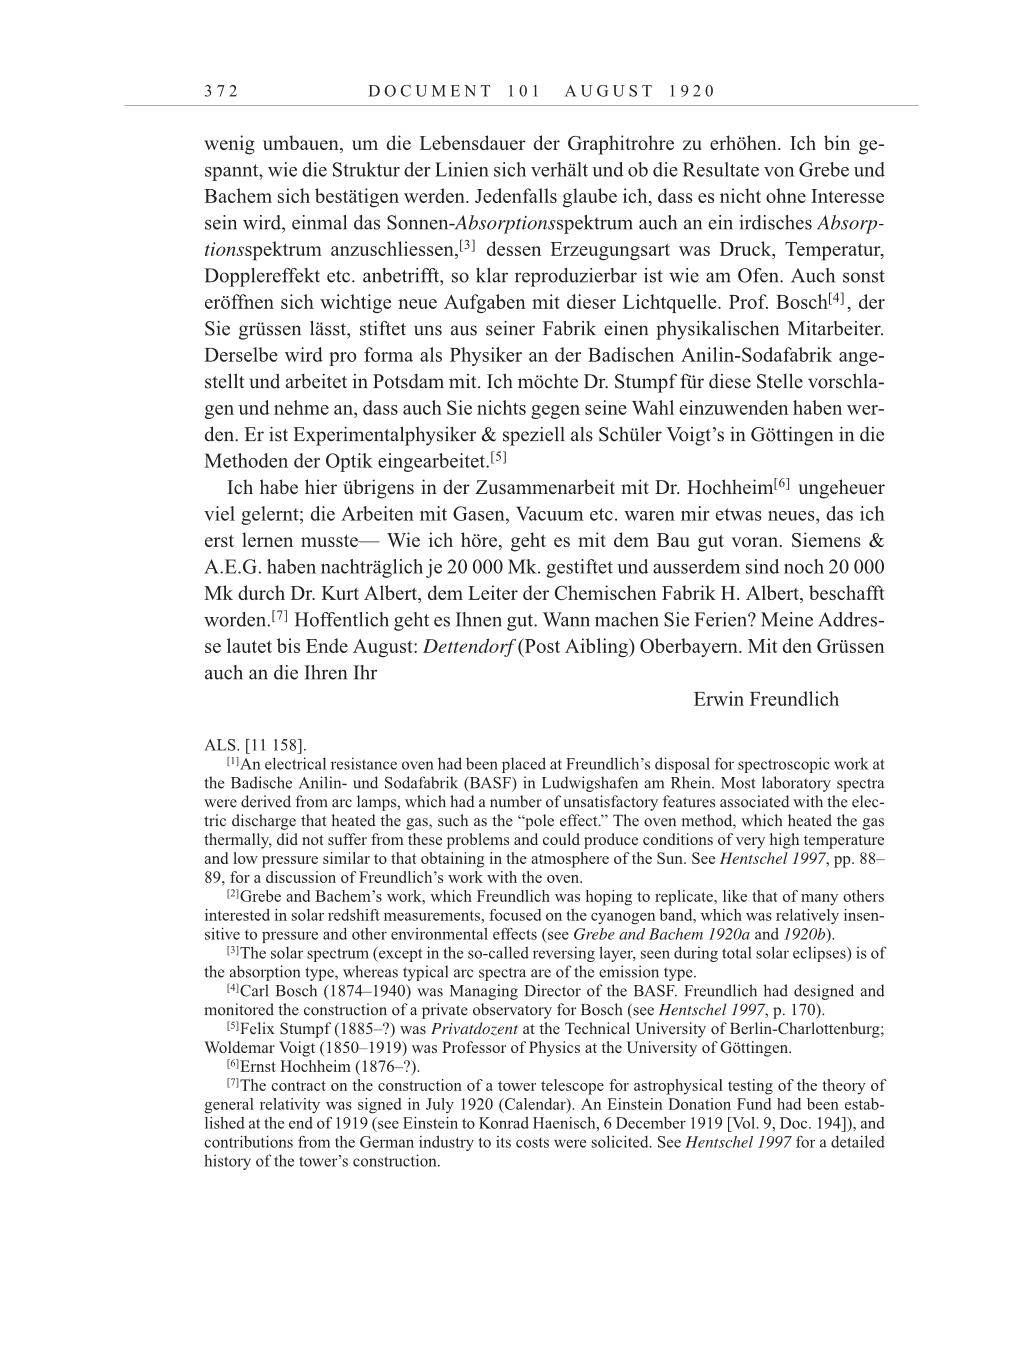 Volume 10: The Berlin Years: Correspondence May-December 1920 / Supplementary Correspondence 1909-1920 page 372